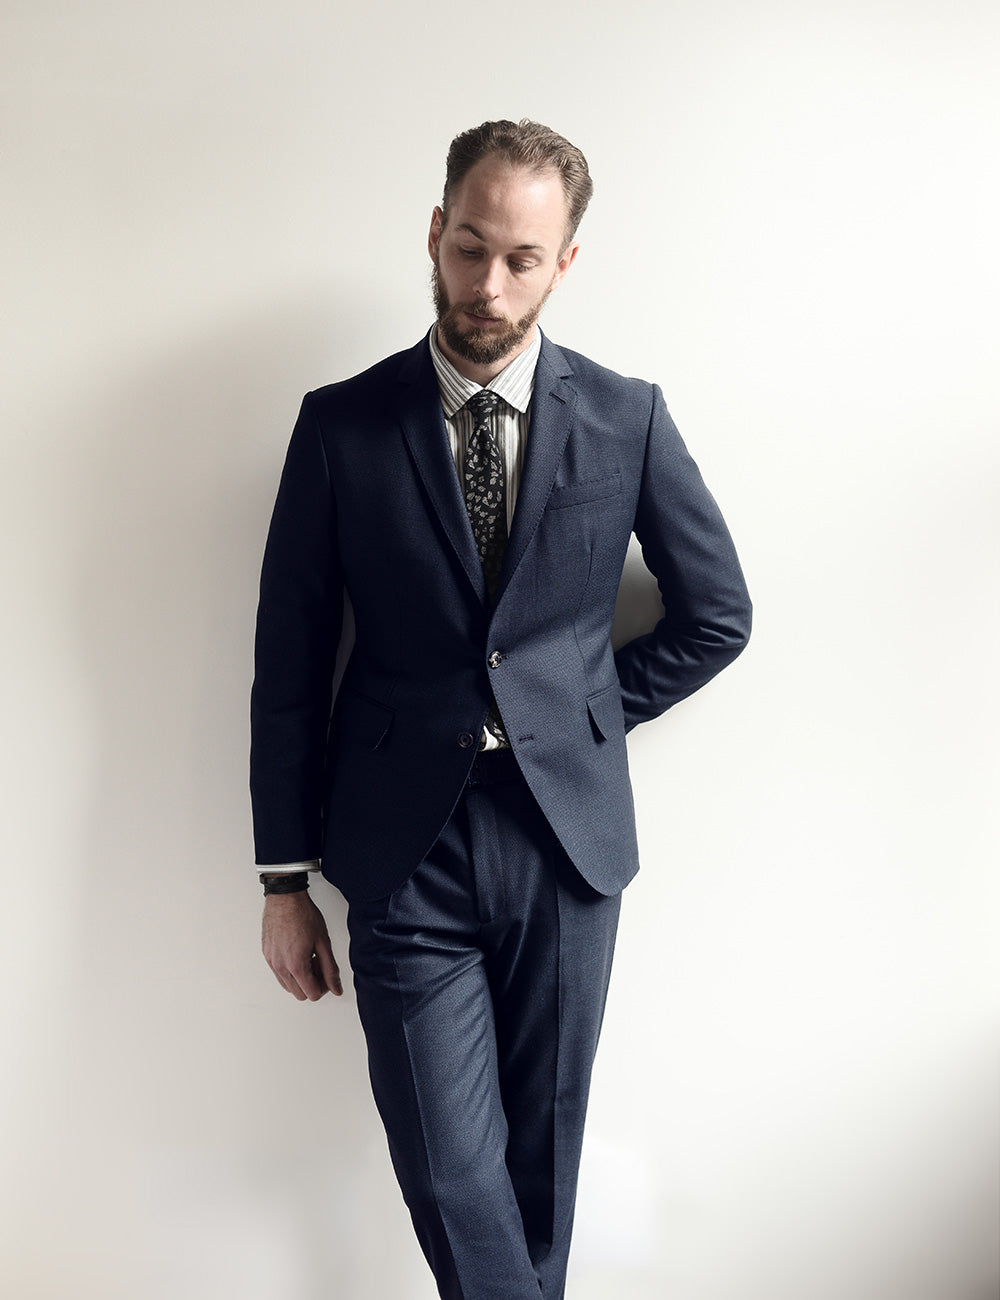 On-body shot of BKT50 Tailored Jacket in Birdseye Weave - Navy. Model is wearing jacket with matching pants, striped dress shirt, and tie.